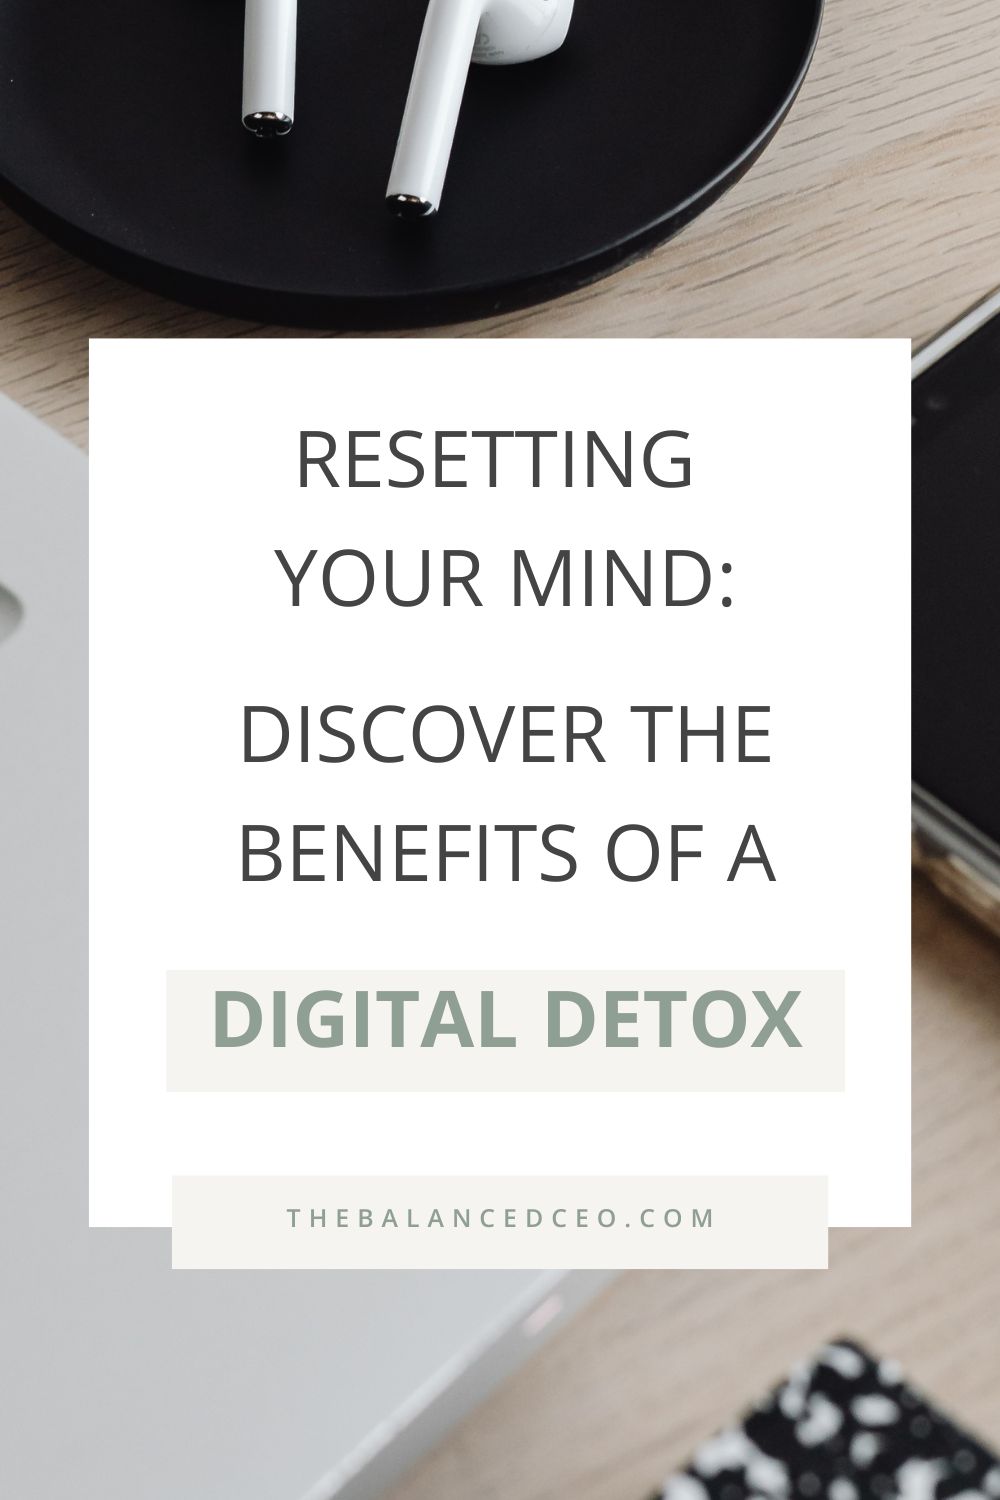 Resetting Your Mind: Discover the Benefits of a Digital Detox